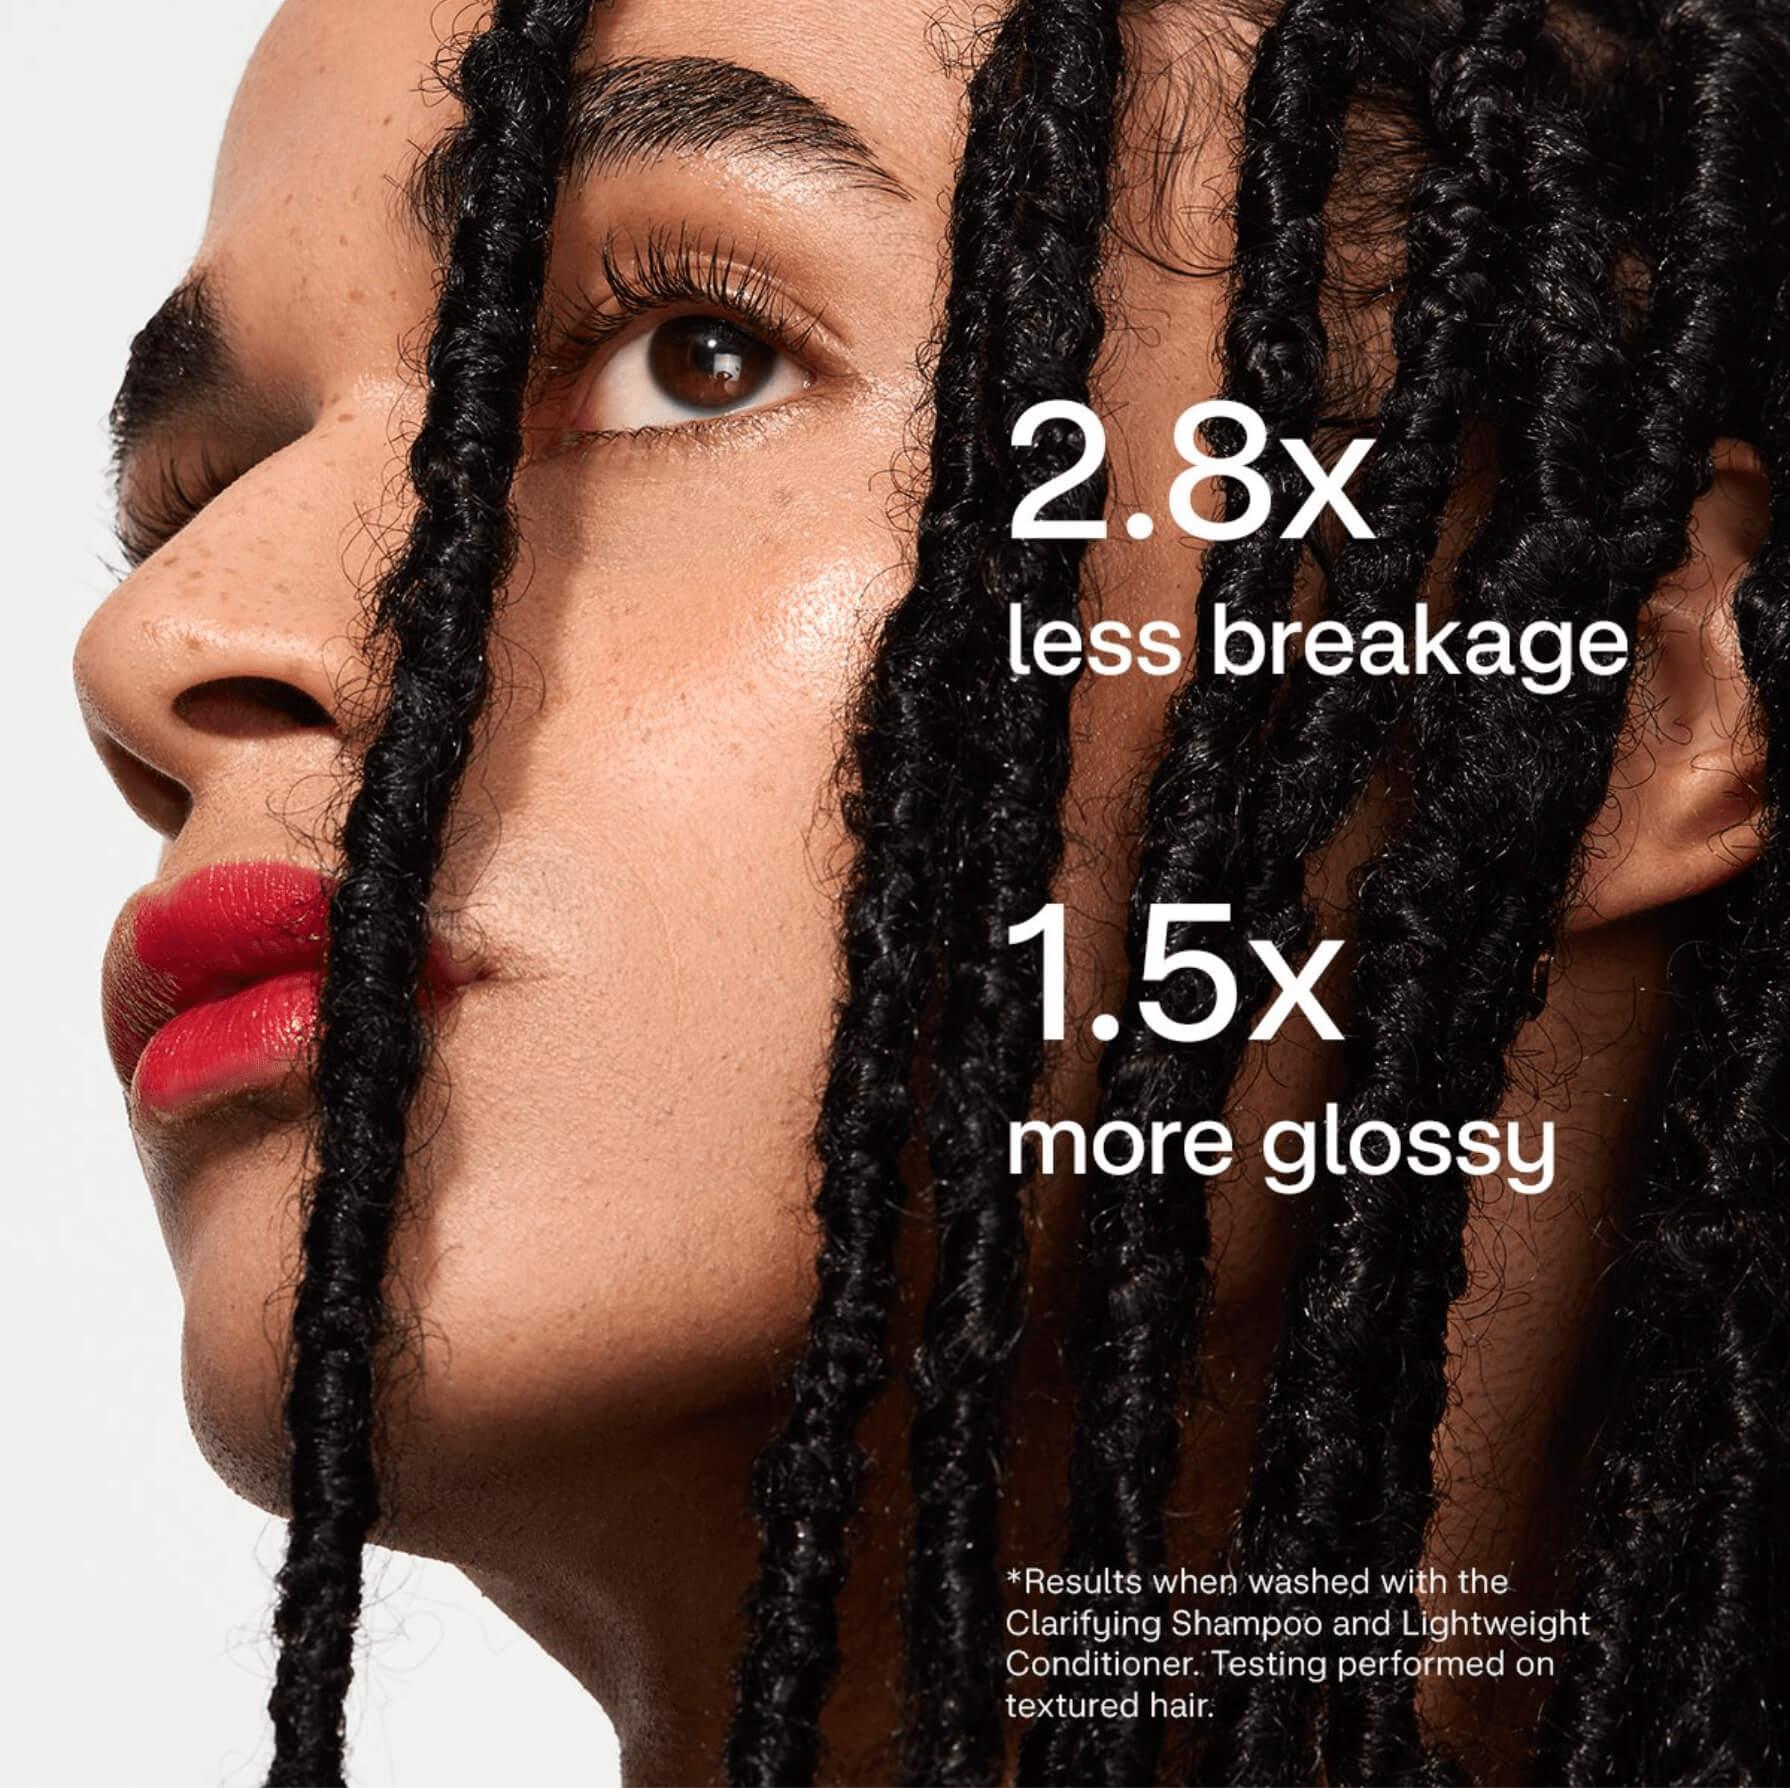 2.8X less breakage and 1.5x more glossy